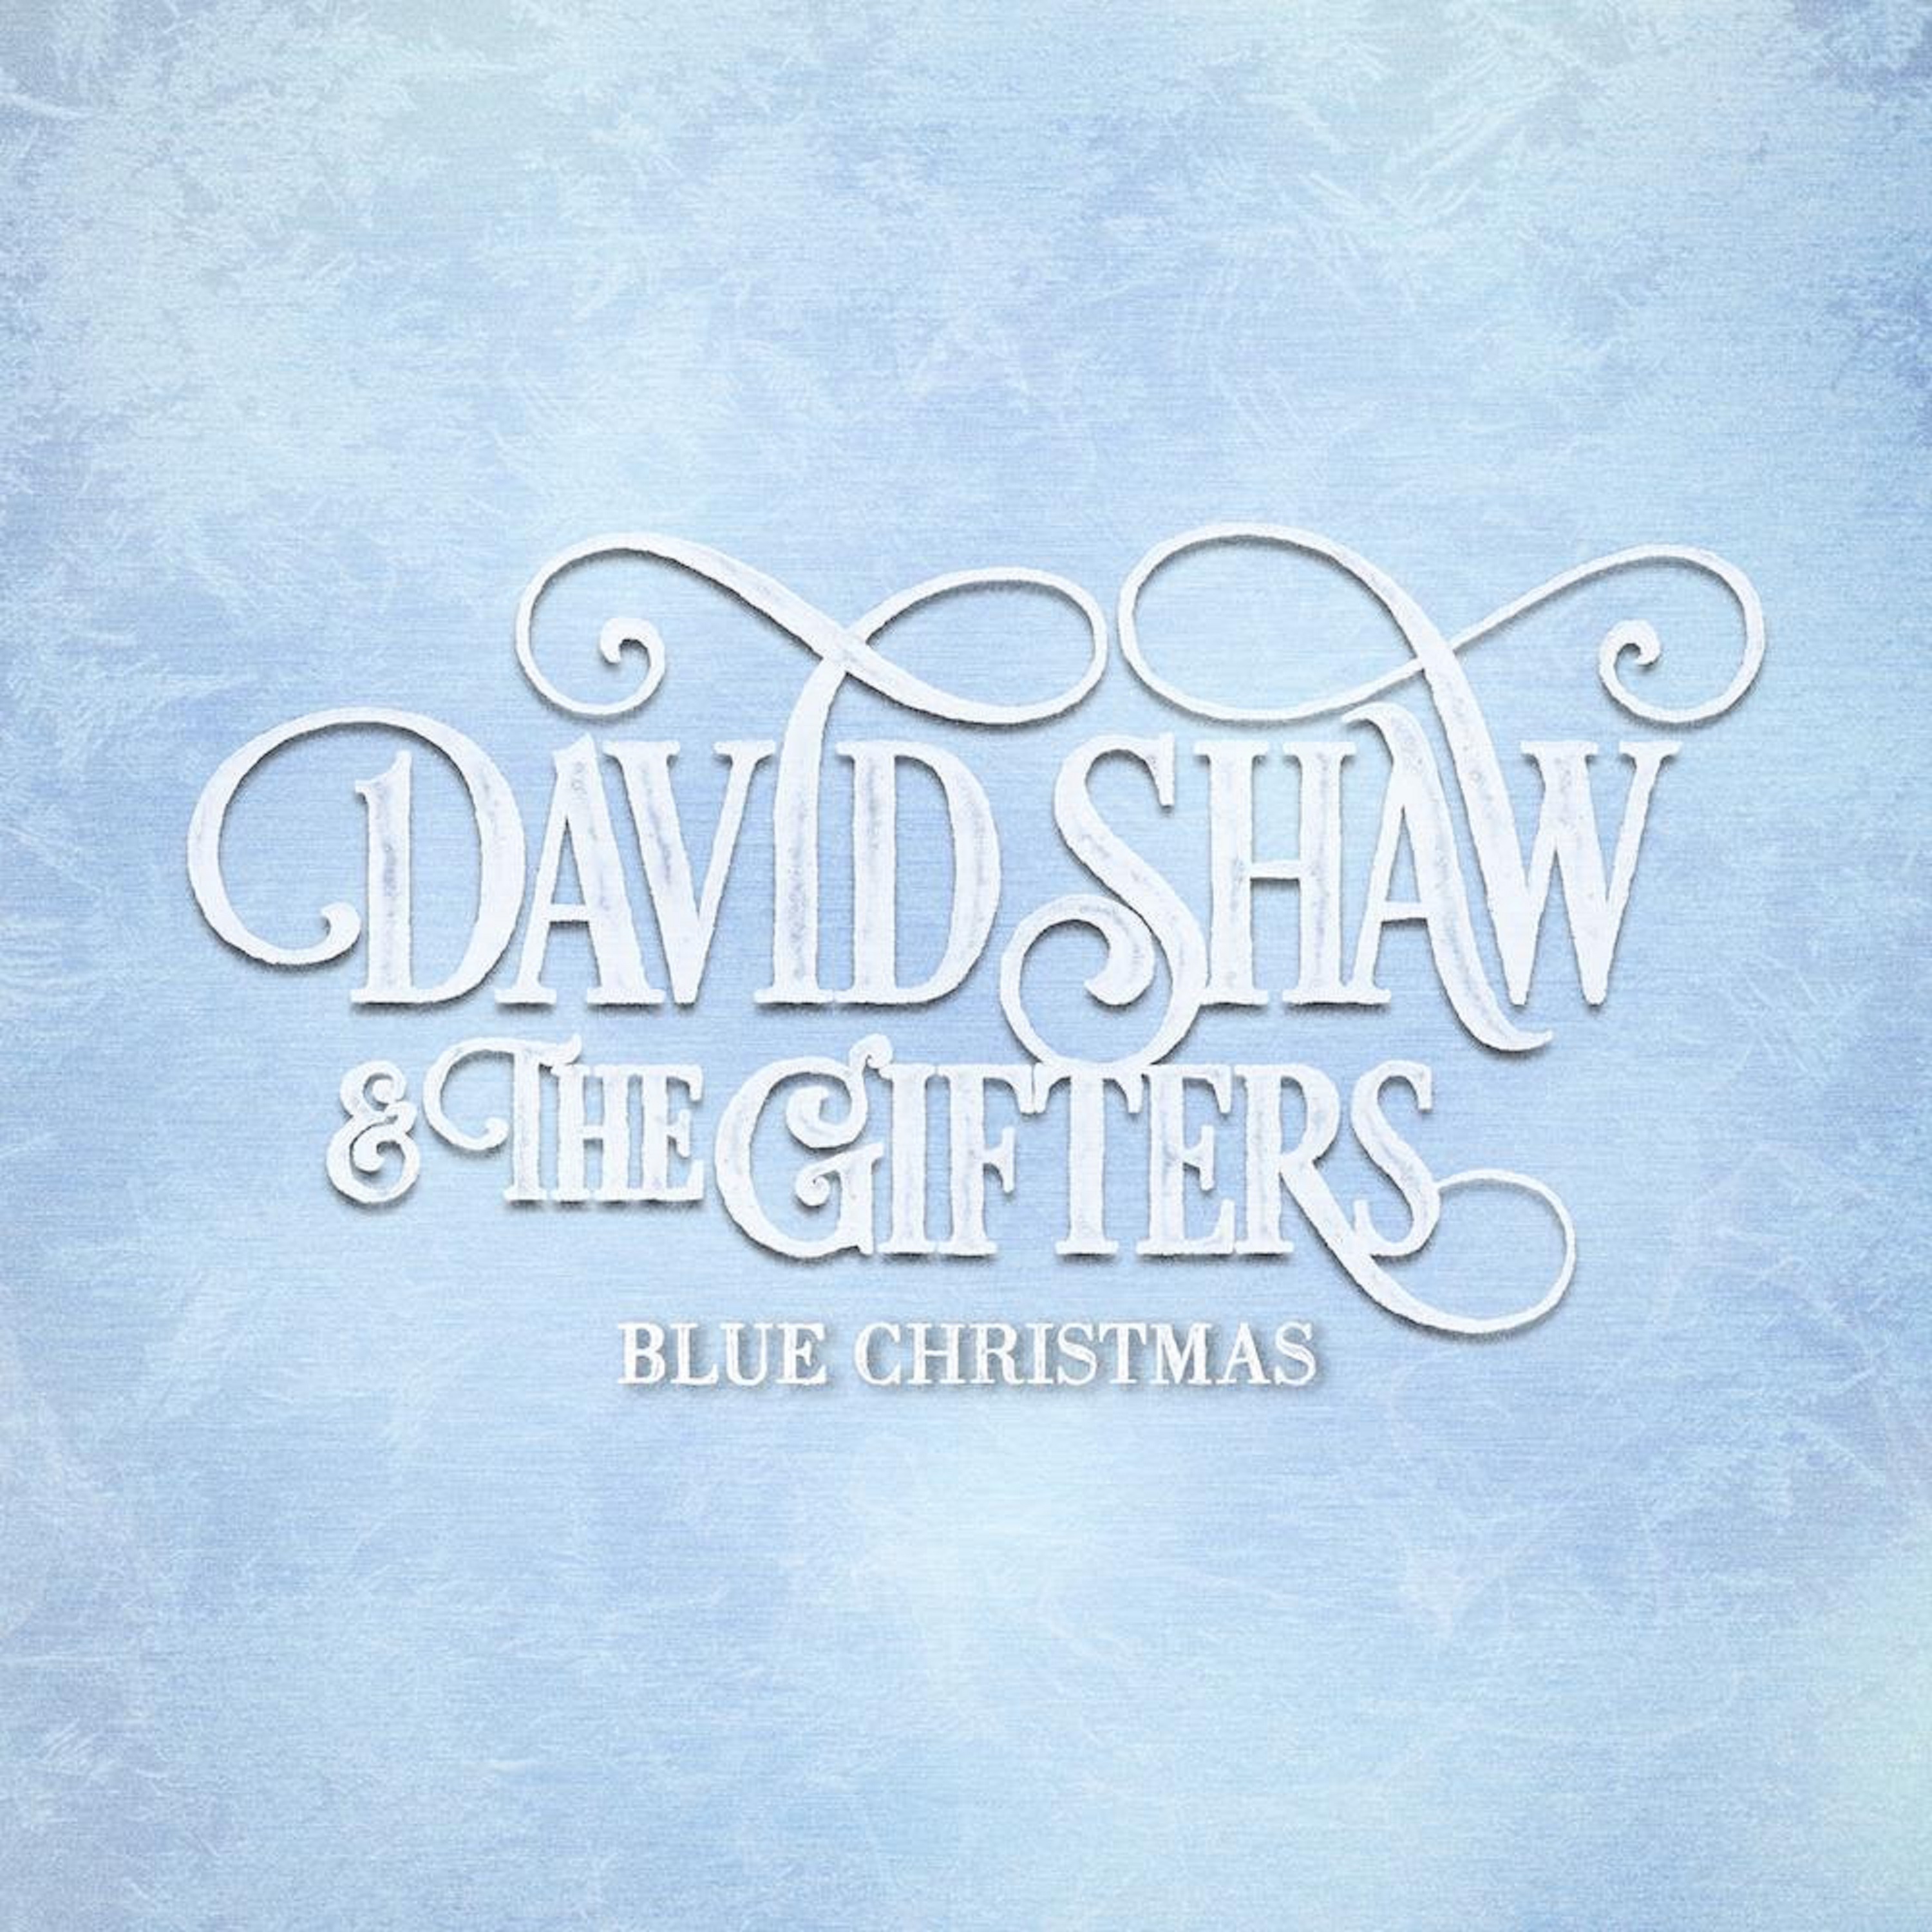 The Revivalists’ David Shaw Releases Cover of “Blue Christmas”